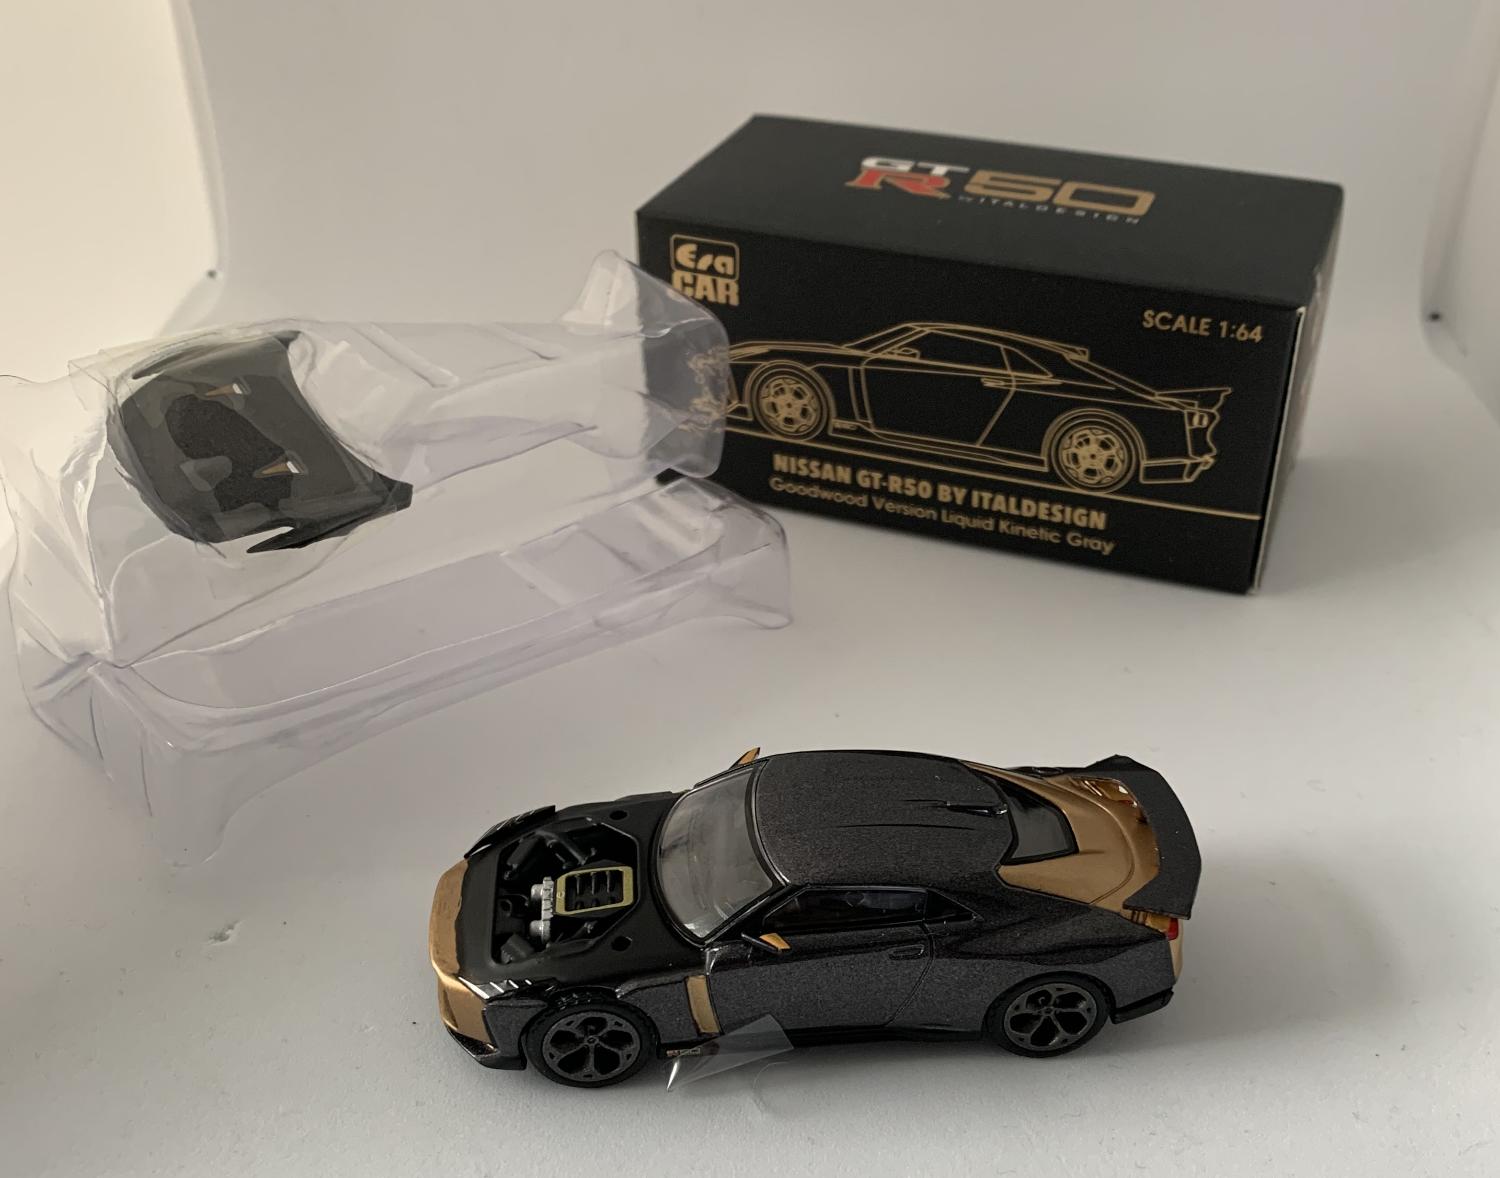 Nissan GT-R50 by Italdesign 2021 Goodwood Version in Liquid Kinetic Gray 1:64 scale model from ERA Car